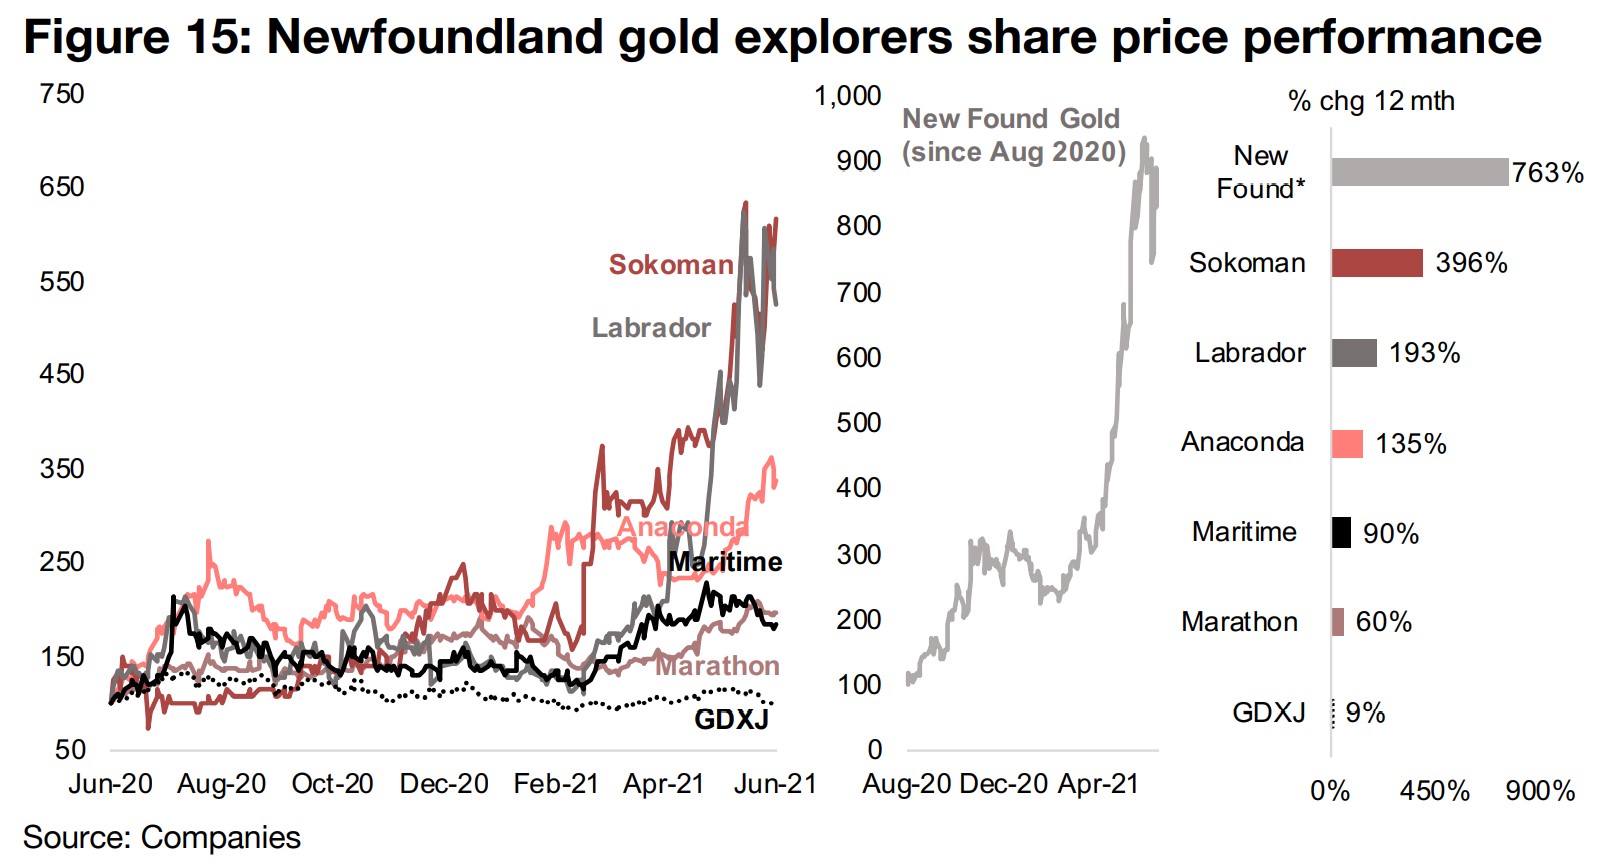 Explorers' share price gains outpace producer/developers